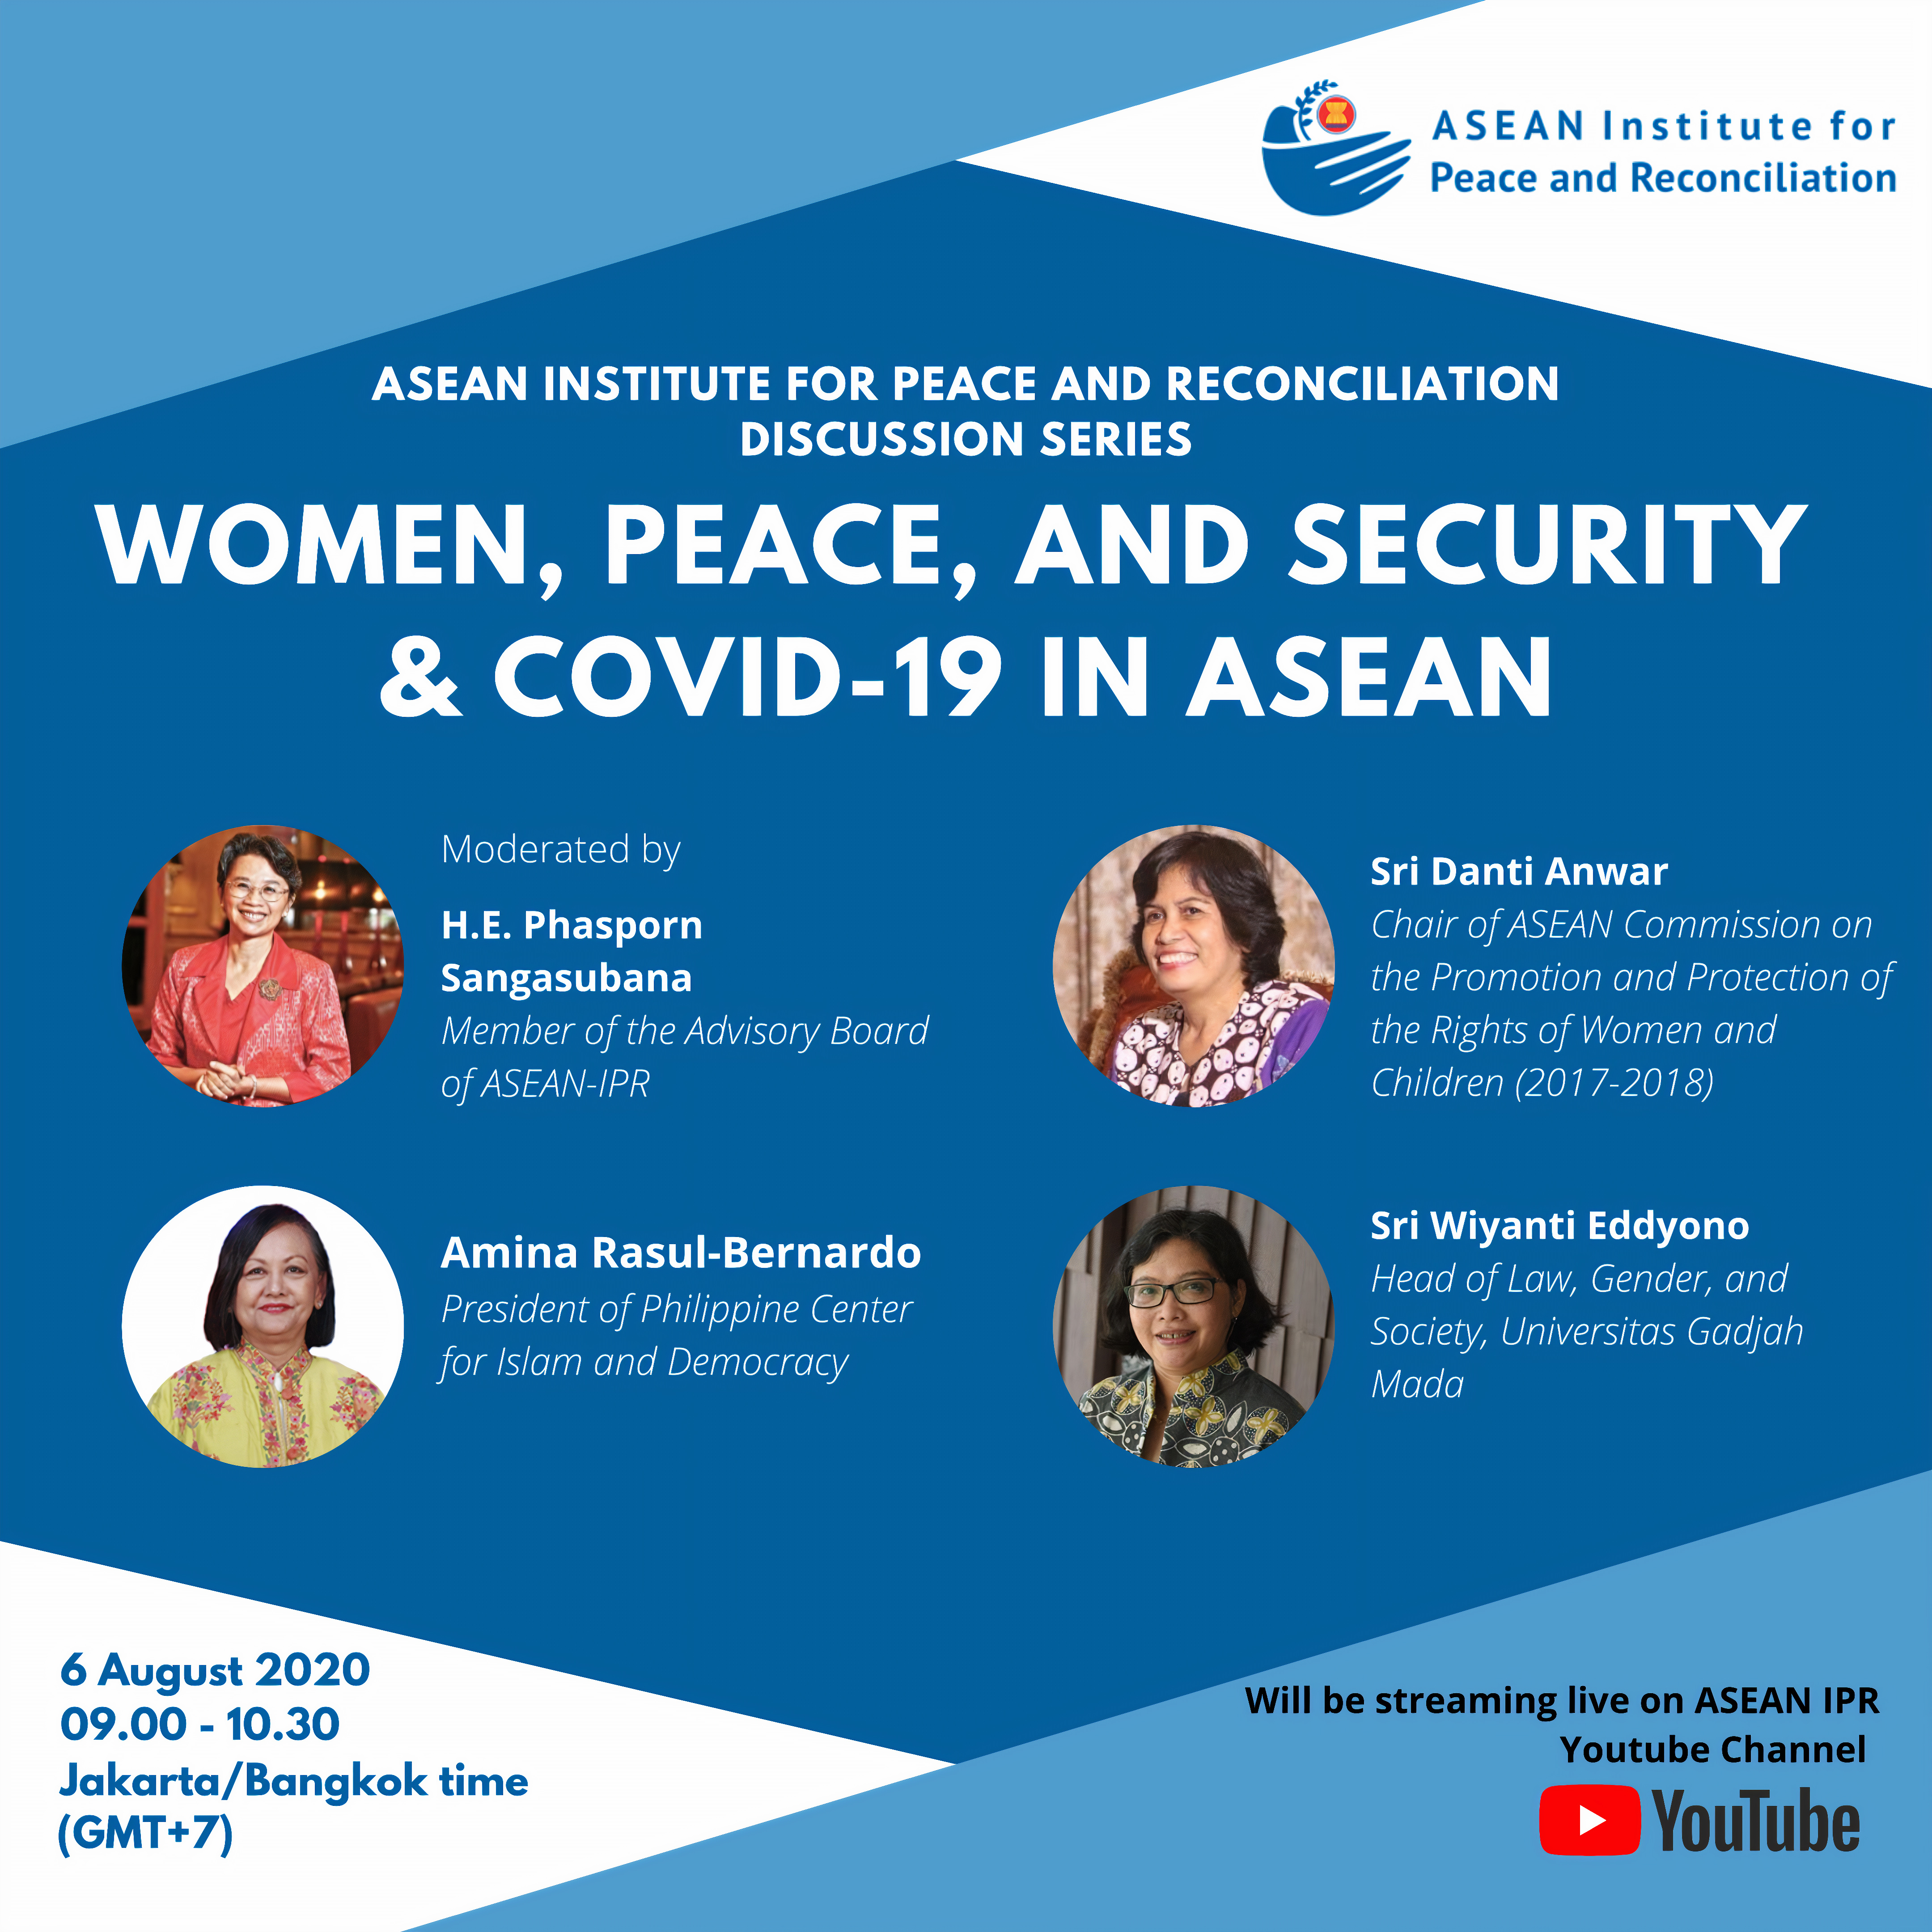 ASEAN-IPR Discussion Series: Women, Peace, and Security & COVID-19 in ASEAN – Thursday, 6 August 2020